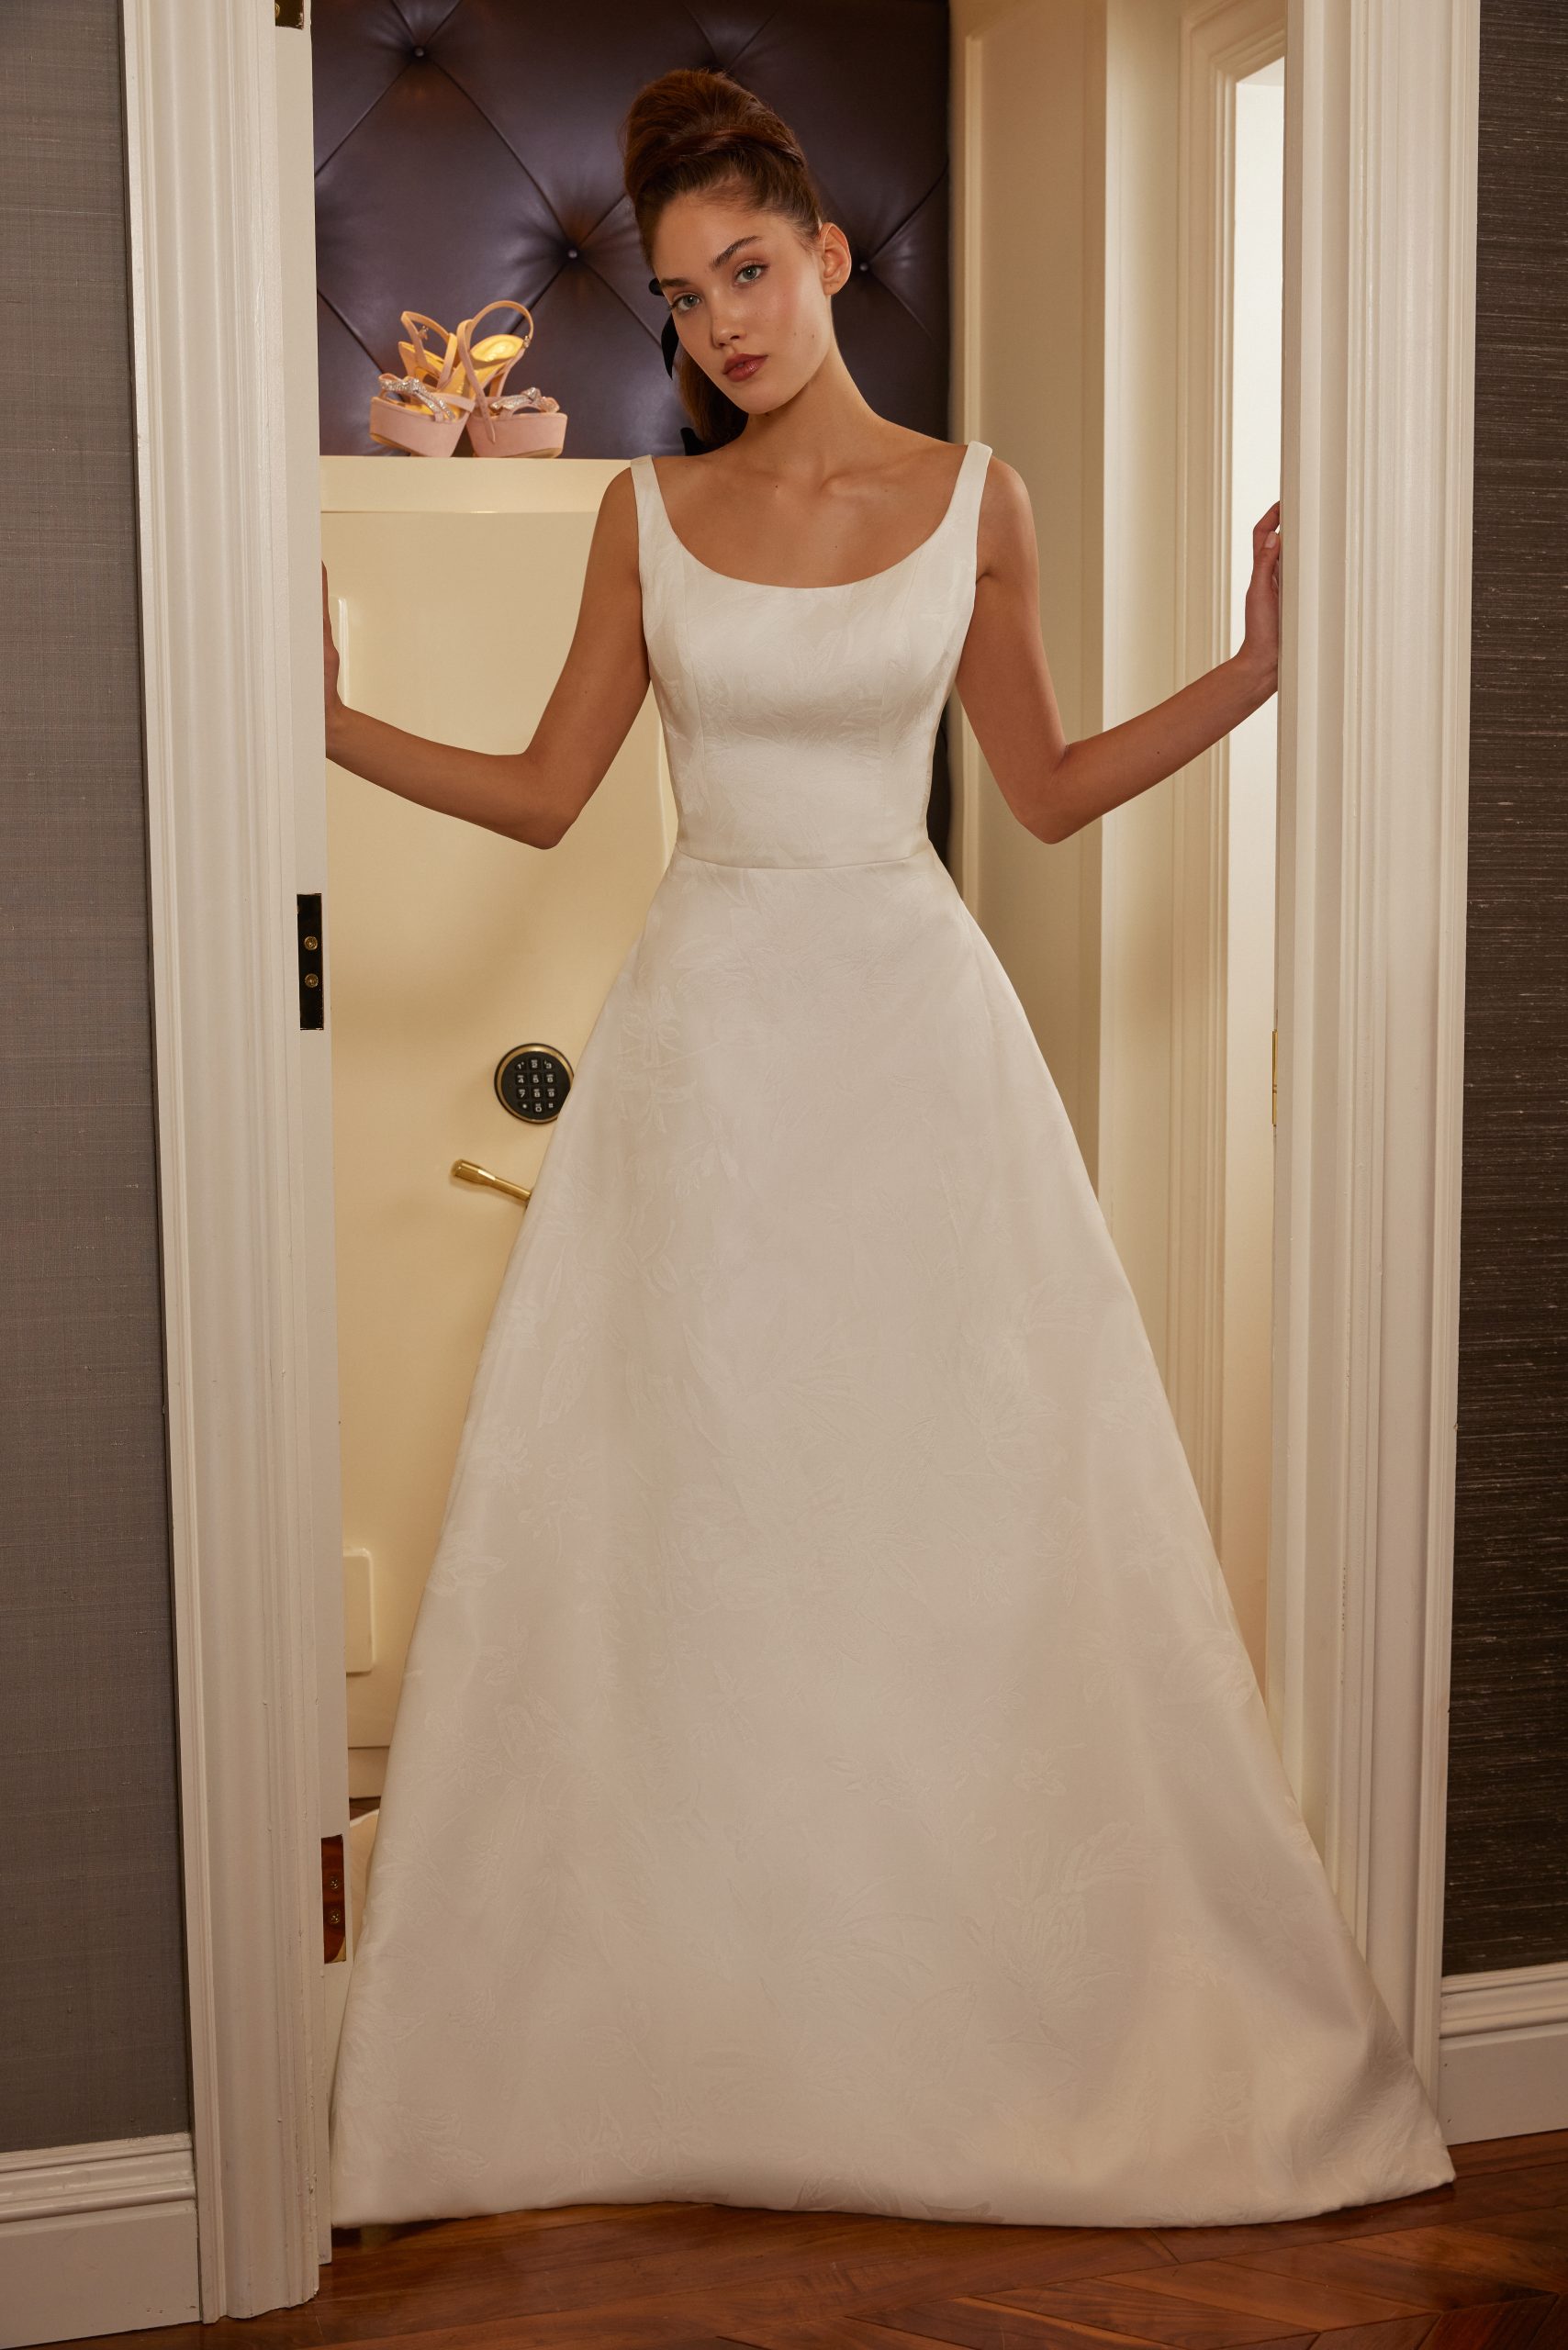 Scoop-Neck Jacquard A-Line Wedding Dress With Bow by Sareh Nouri - Image 1